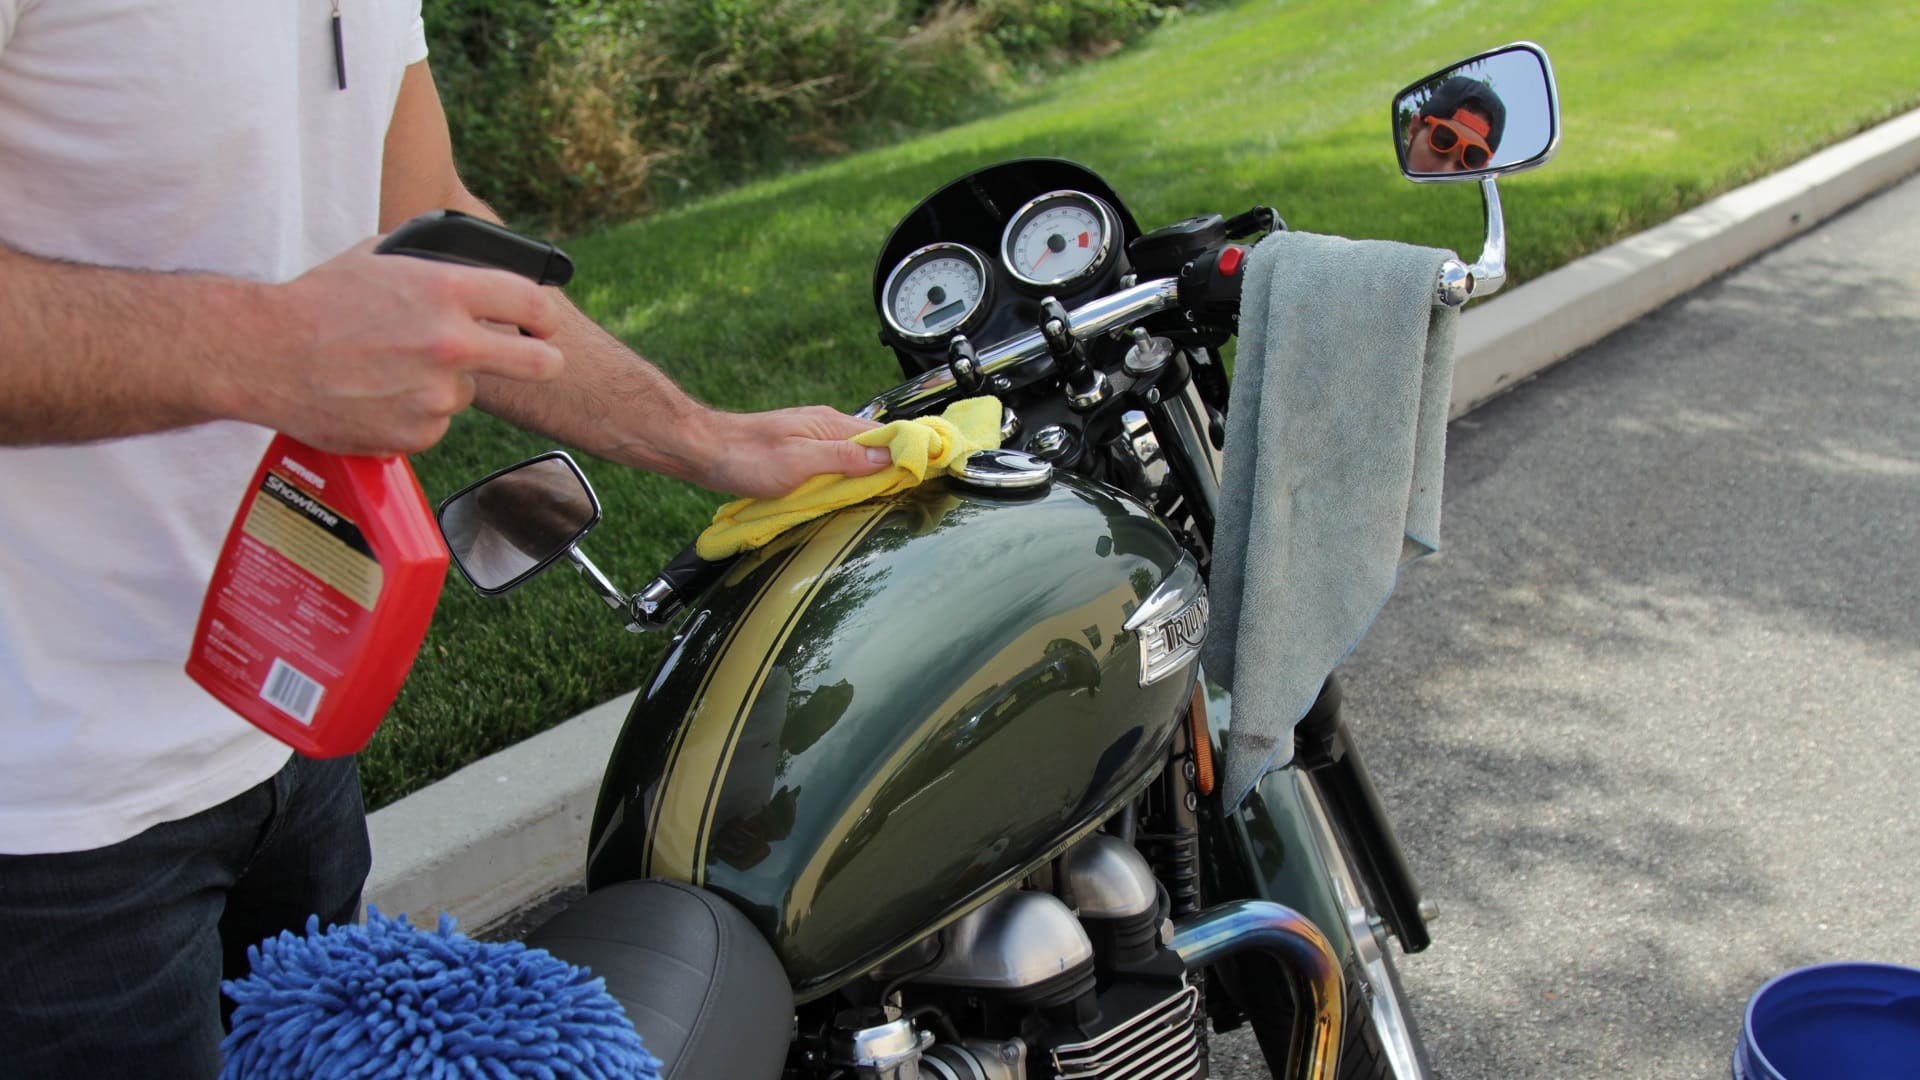 The Best Motorcycle Cleaner - Top 6